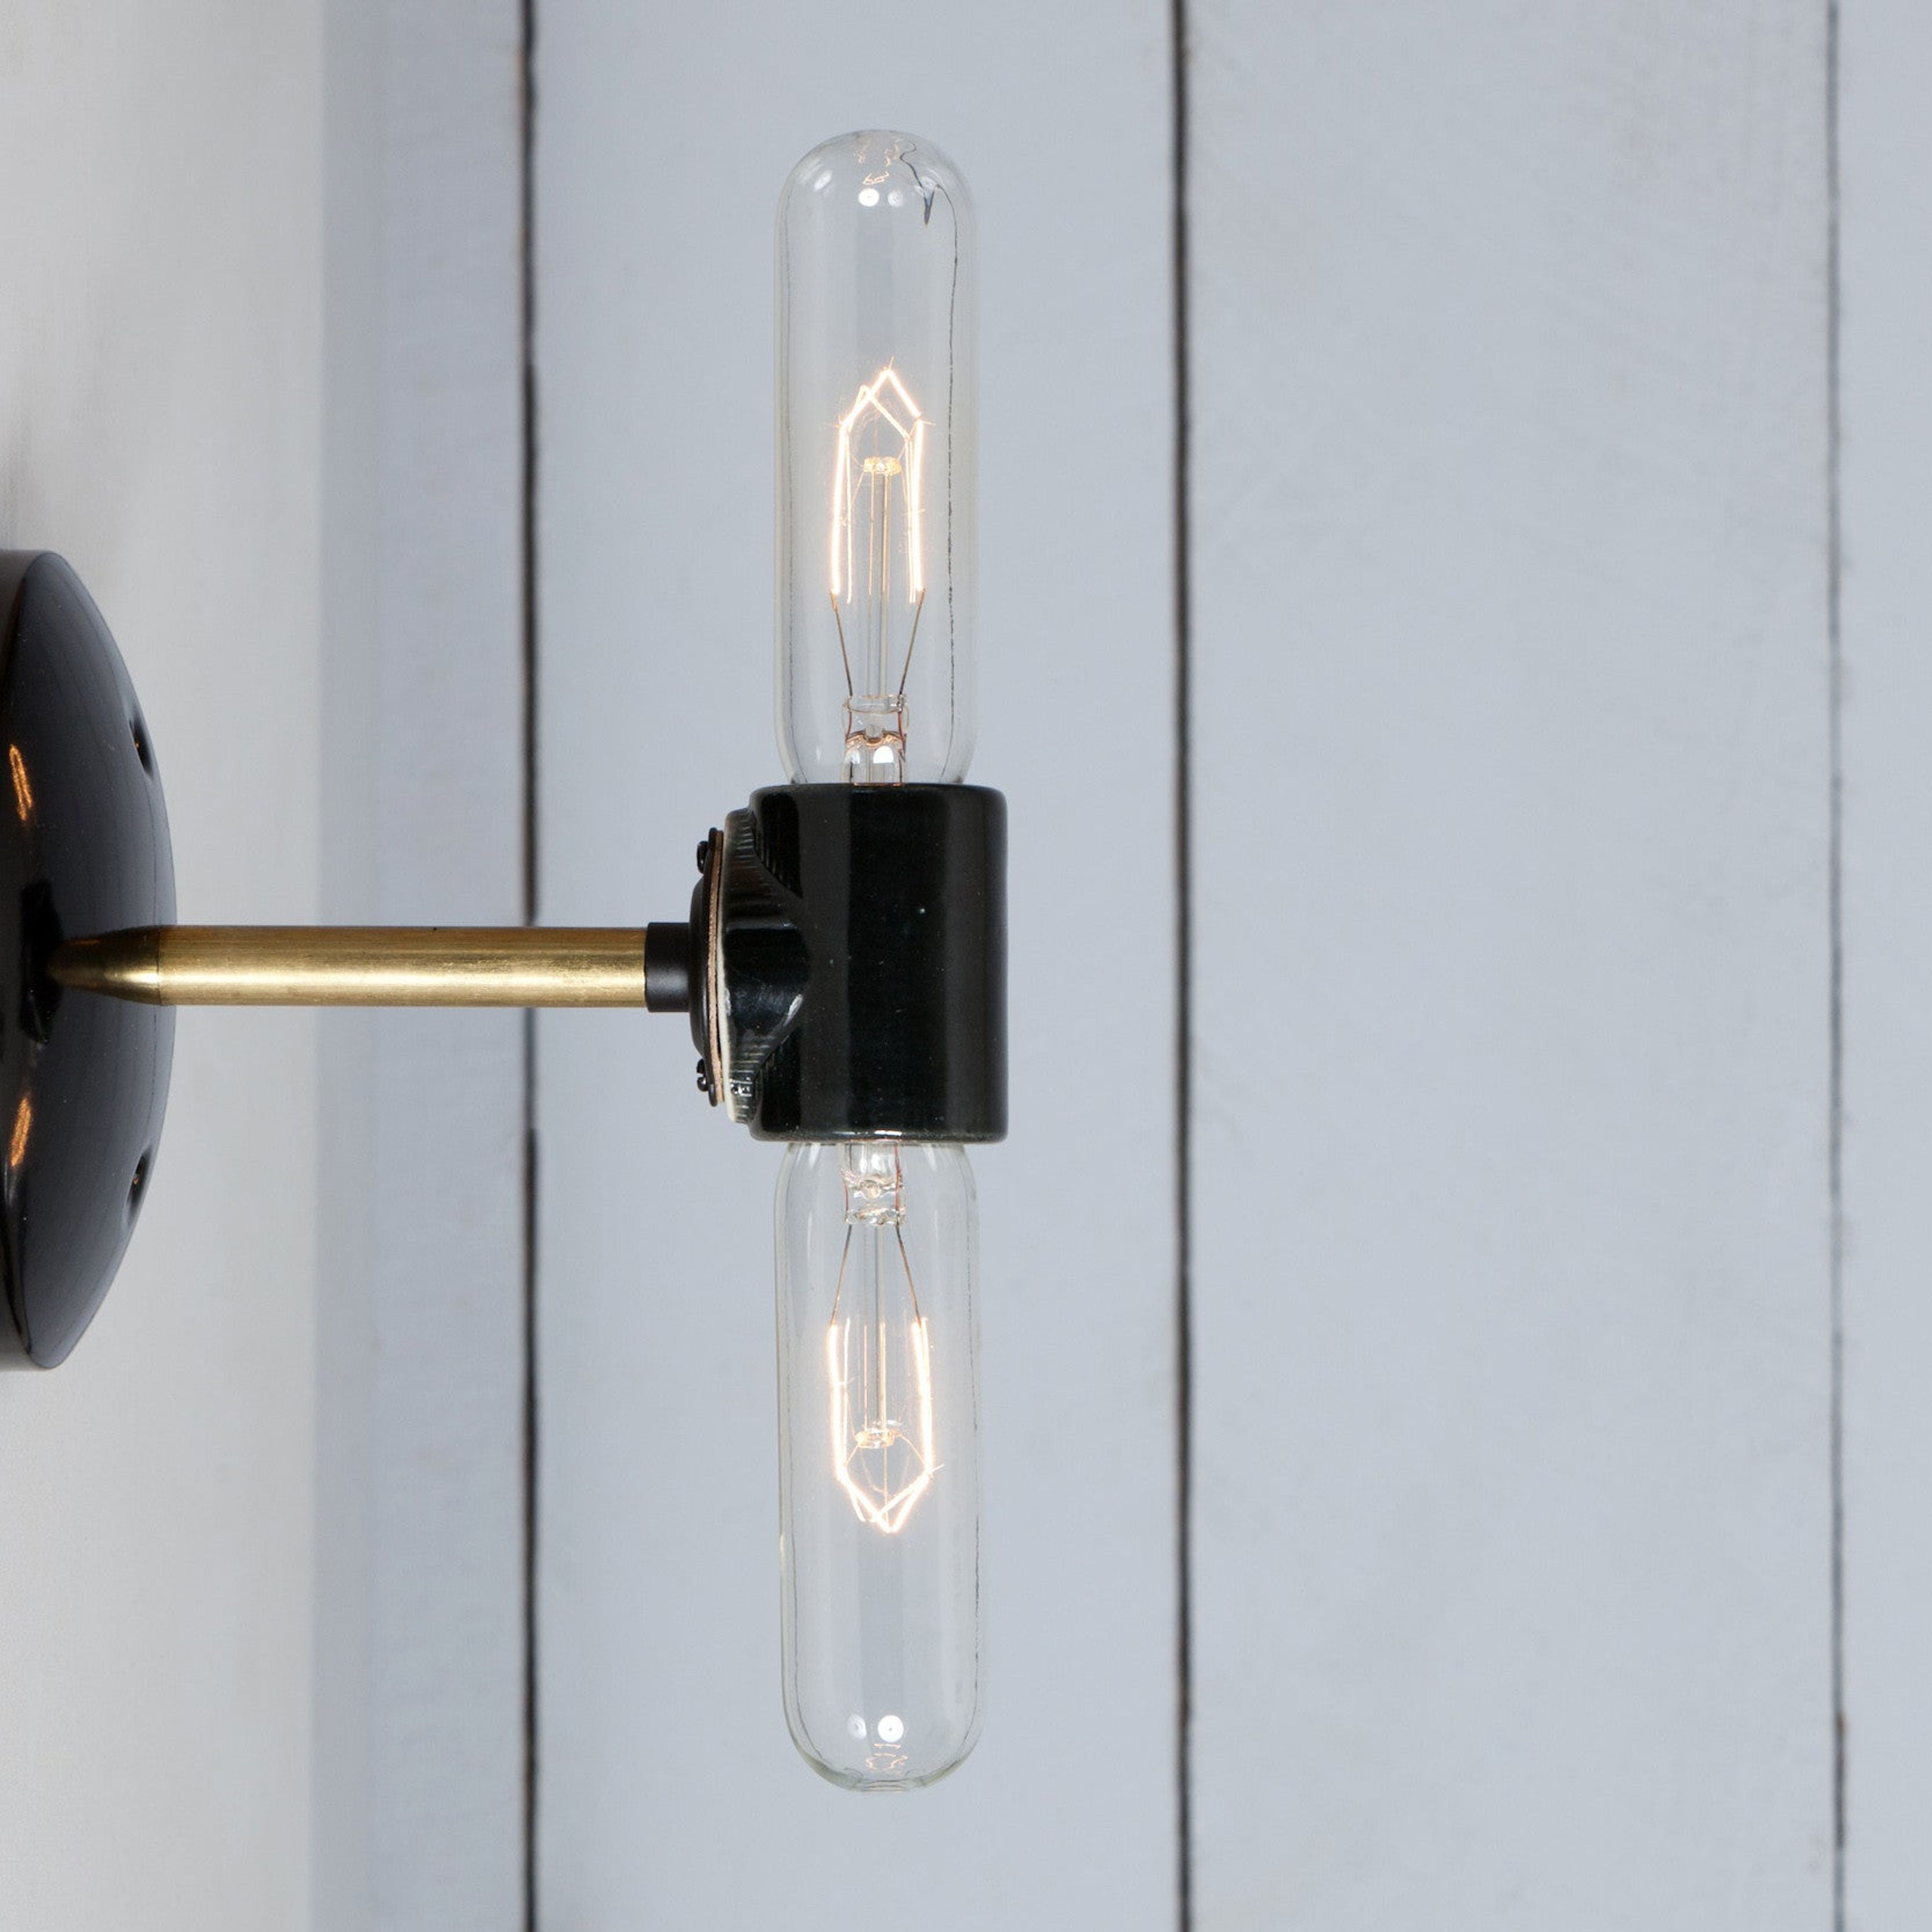 Double Brass Wall Sconce Light - Bare Bulb Lamp